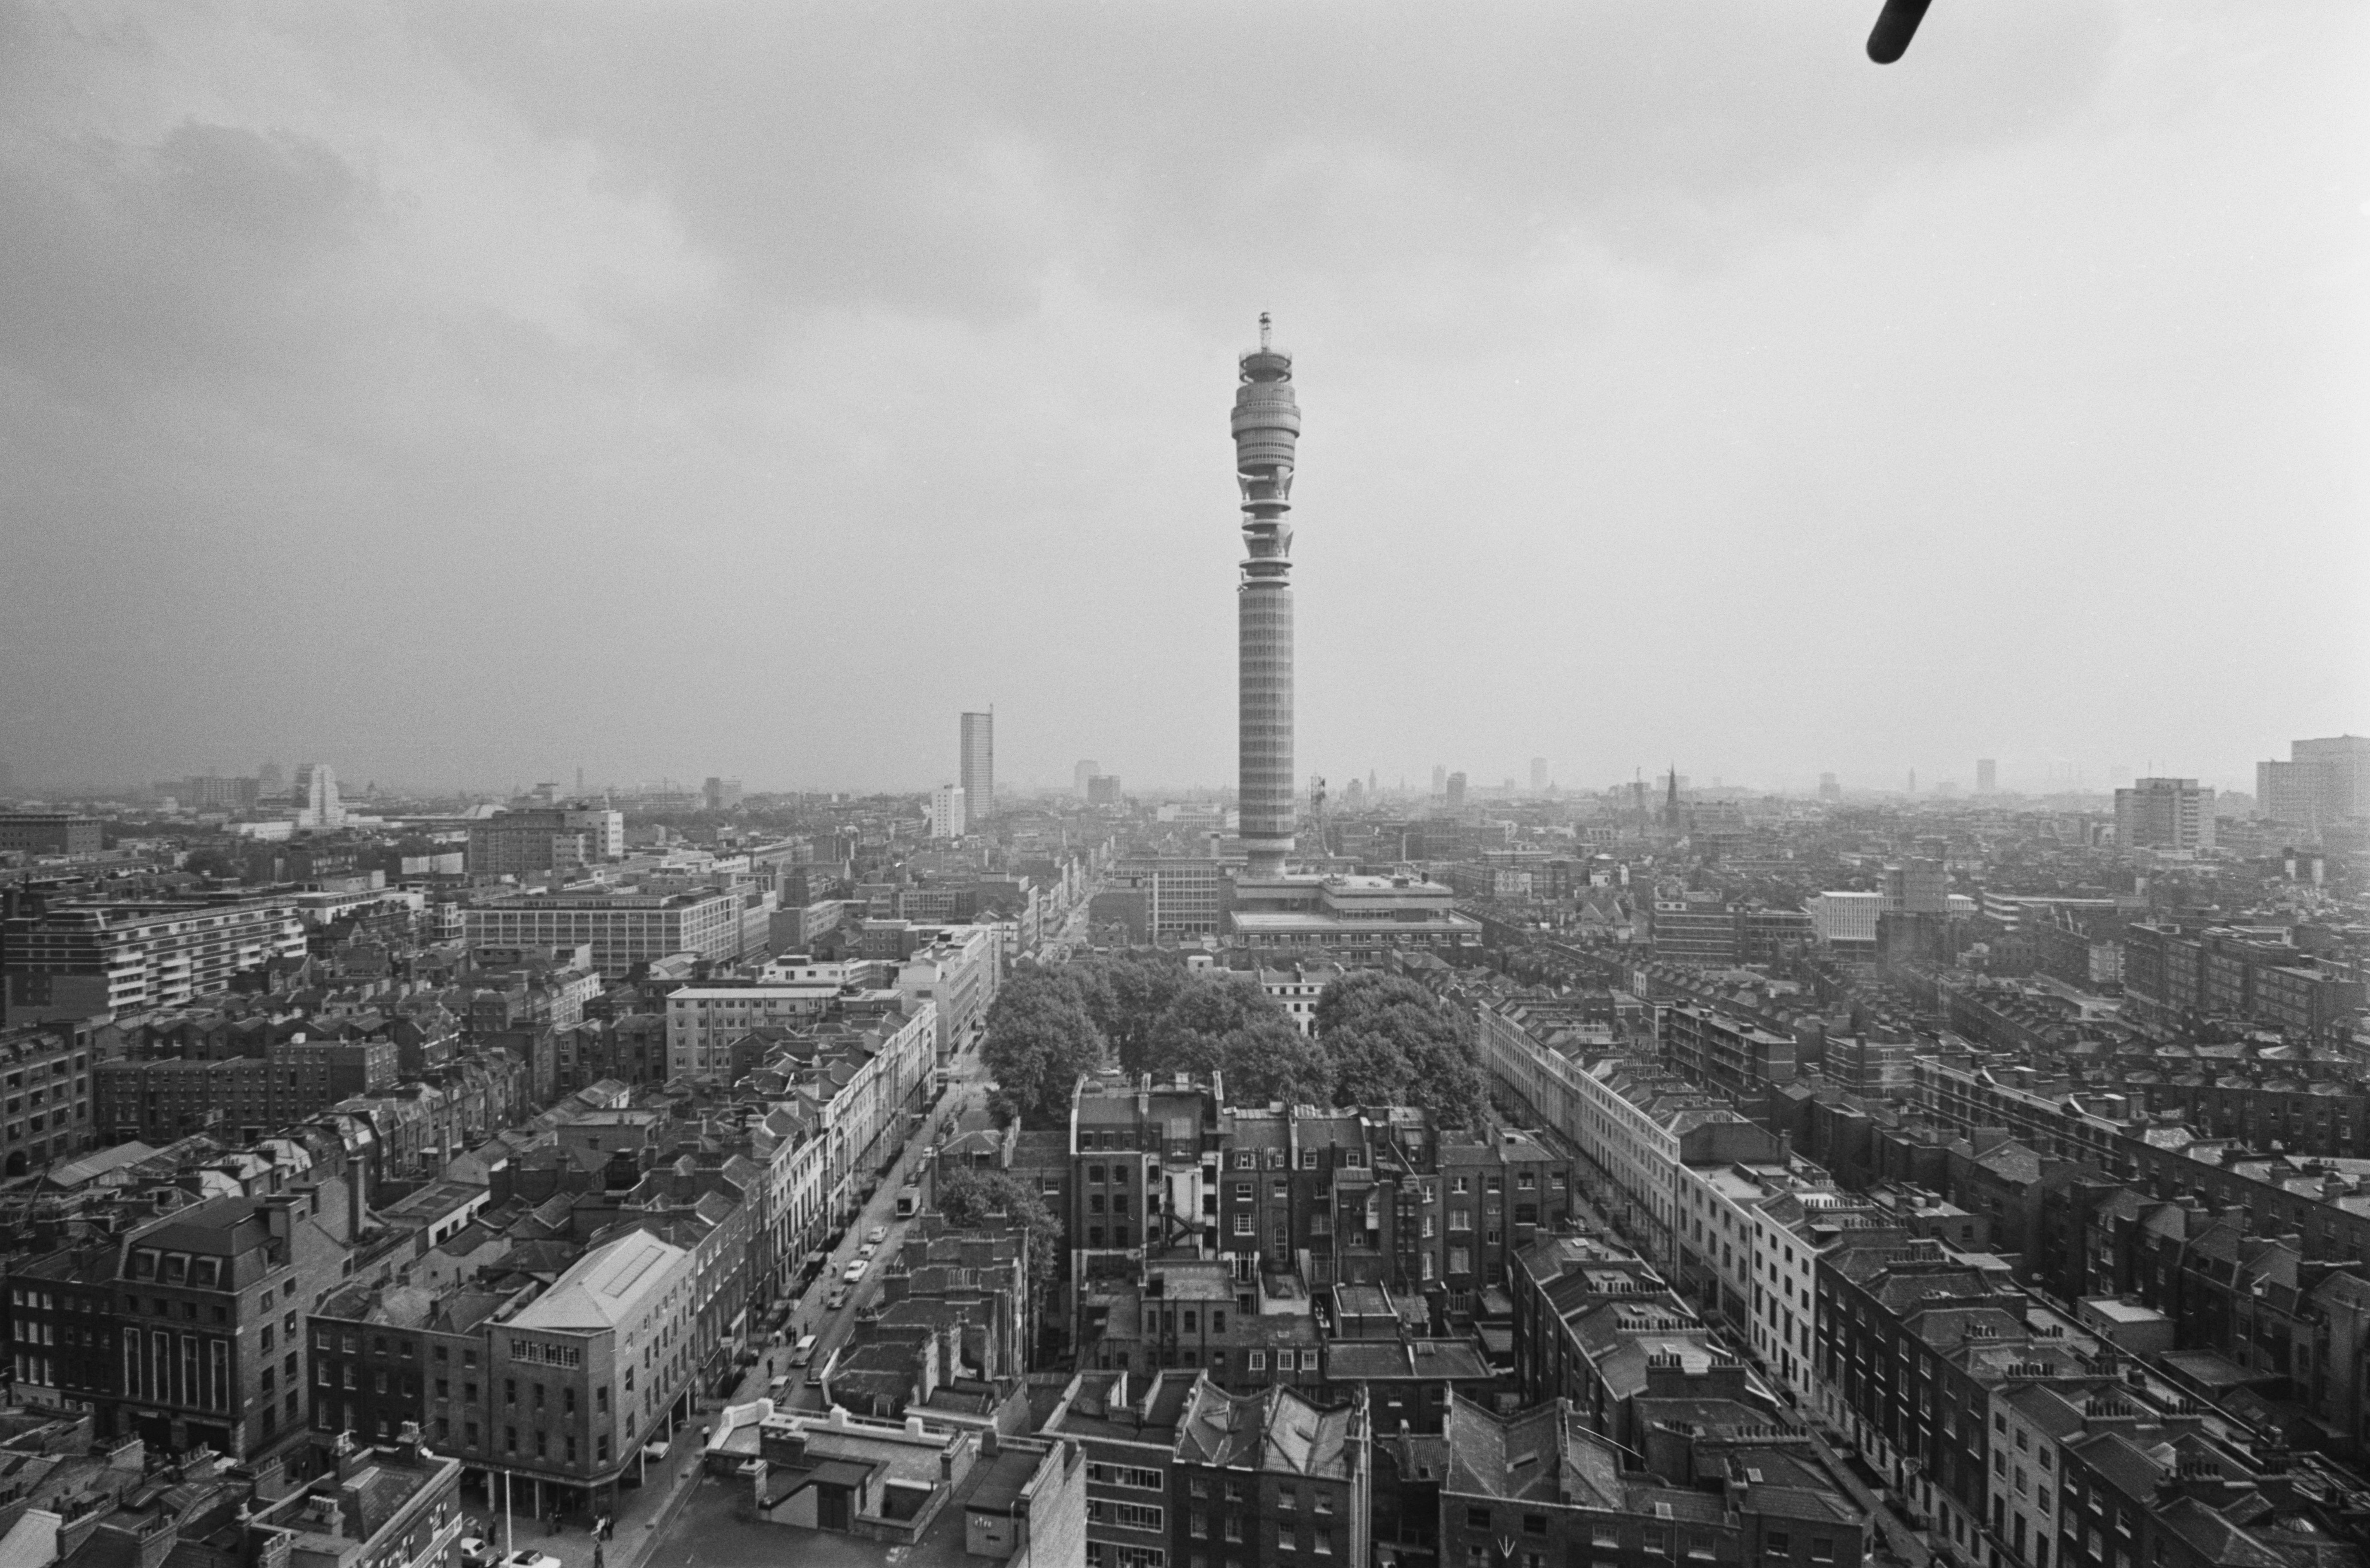 The BT Tower has been sold to a US hotel group for £275 million